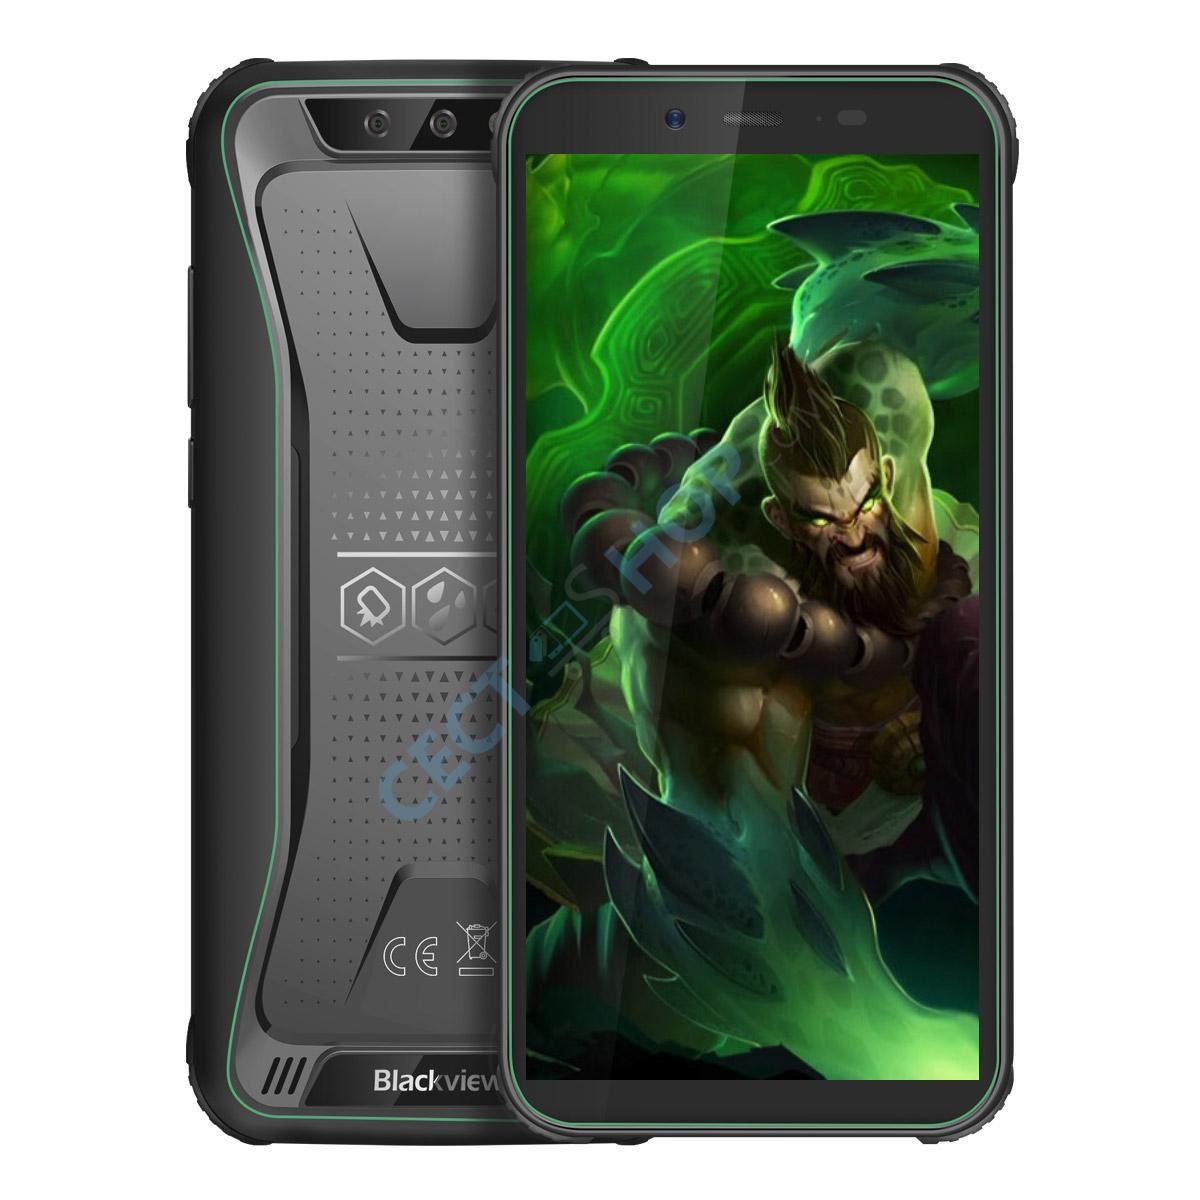 Blac   kview BV5500 Pro Outdoor Smartphone